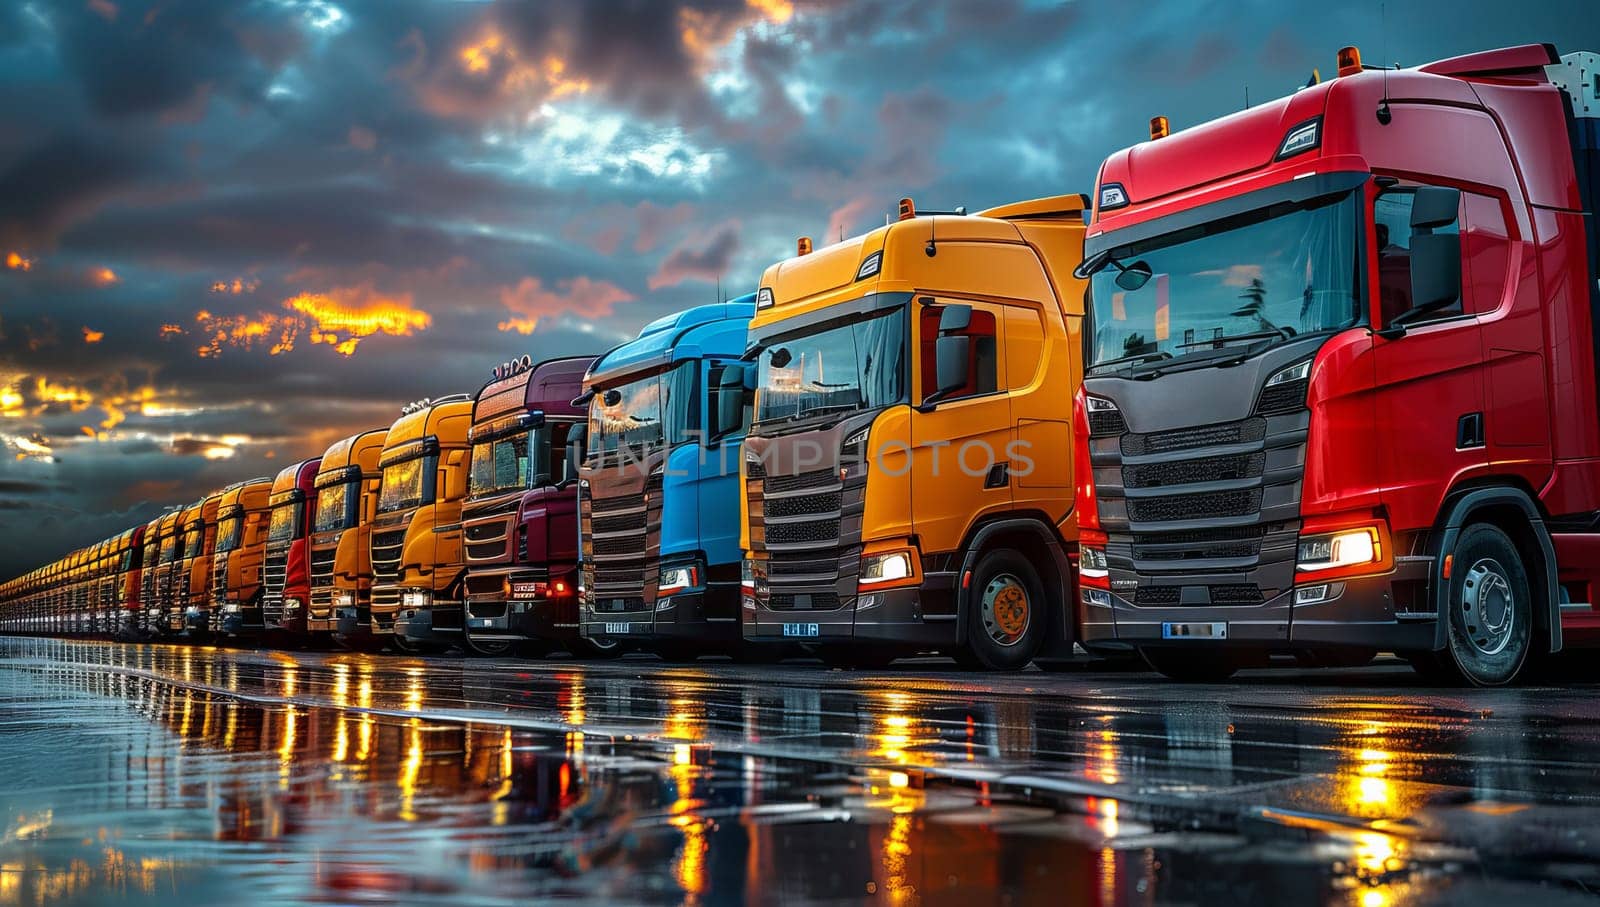 Group of trucks in a row on a wet road at sunset.